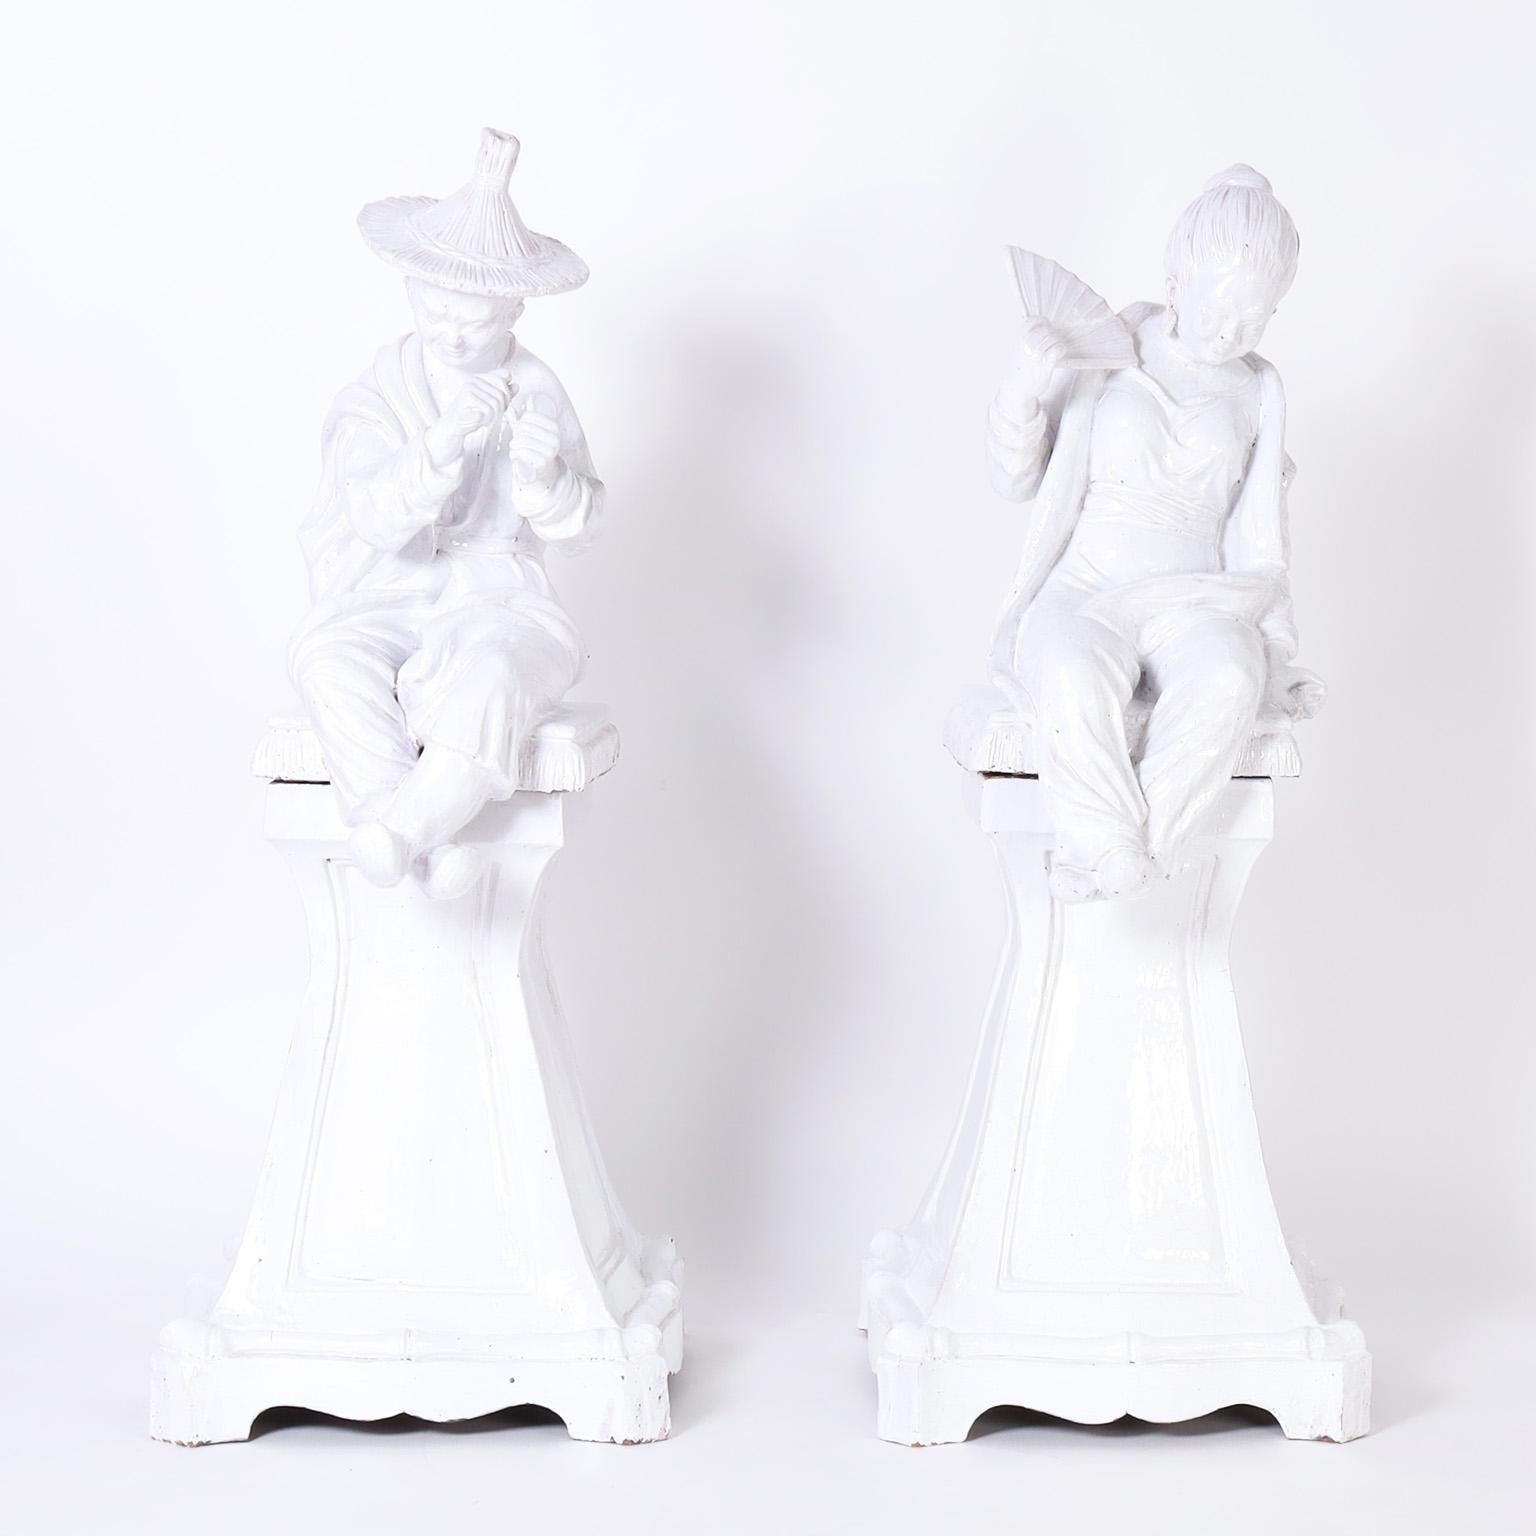 Striking pair of mid century chinoiserie figures crafted in terra cotta with a distinctive Italian white glaze, depicting a male and female figure seated on pillows over classical pedestals.